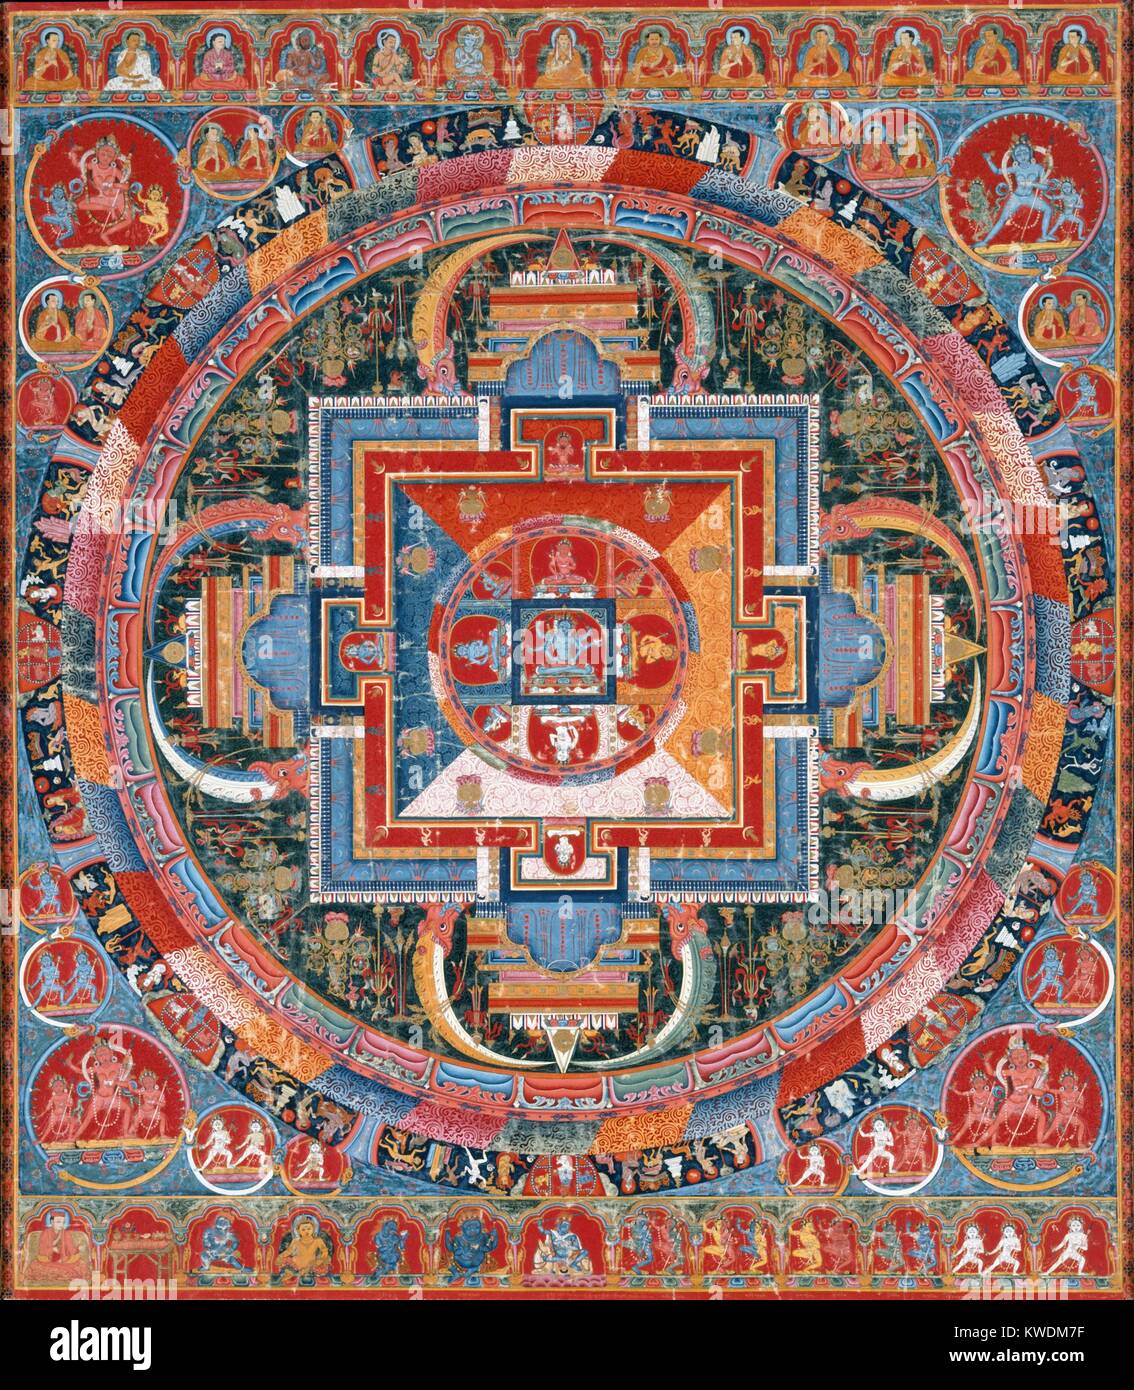 MANDELA OF JNANADAKINI, Tibet, Buddhist, 1370-1400, painting, distemper on cotton. The central six-armed devi (goddess), Jnanadakini, is surrounded by eight emanations of the devi, that correspond to the colors of the mandala’s four quadrants. The tangka is populated with many figures: deities, lamas, monks dakinis, and mahasiddhas (BSLOC 2017 16 14) Stock Photo